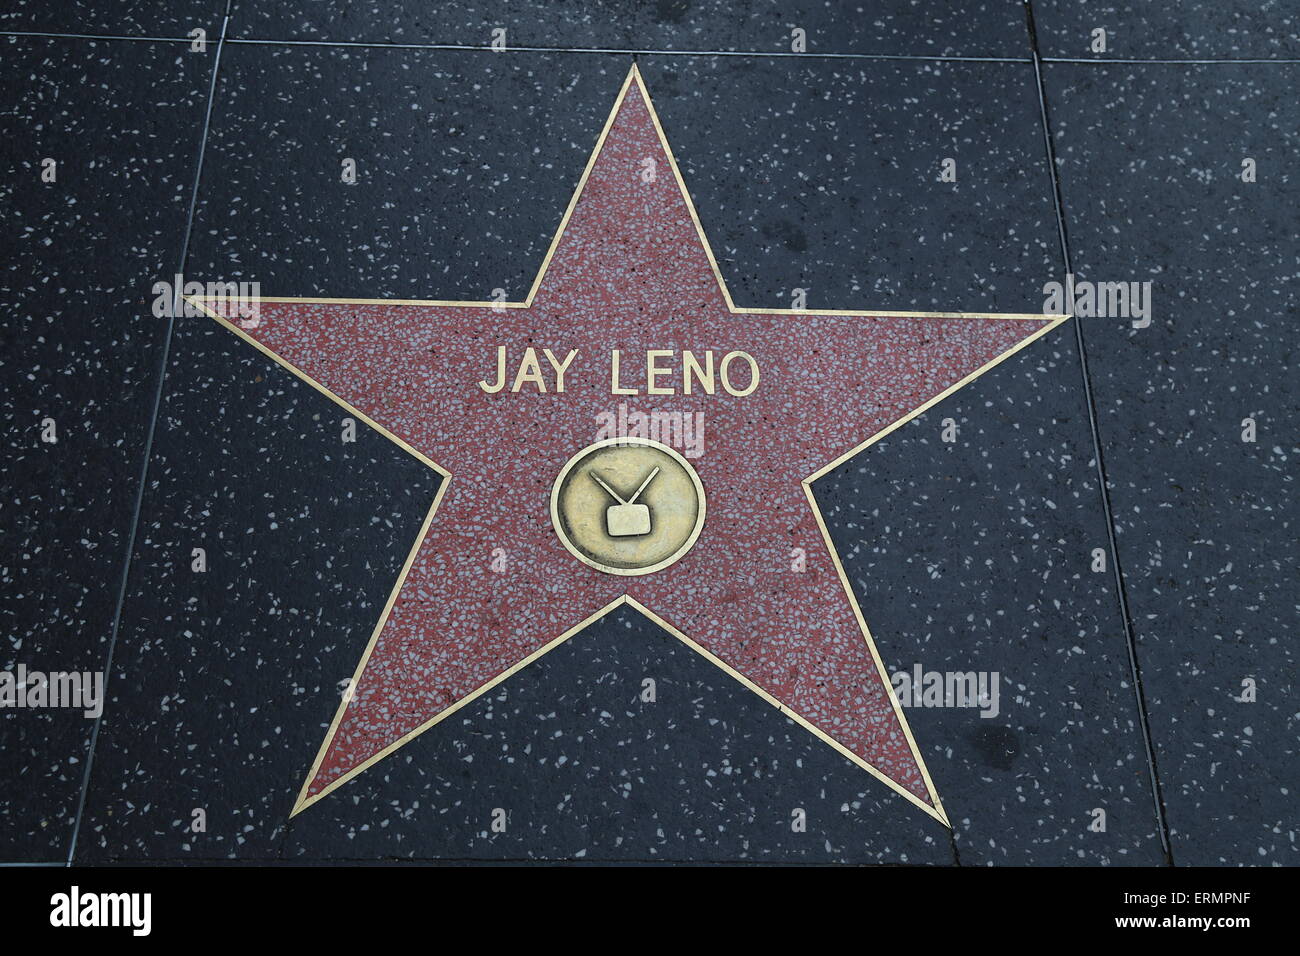 Jay Leno's Star on the Hollywood Walk of Fame in Hollywood, California Stock Photo